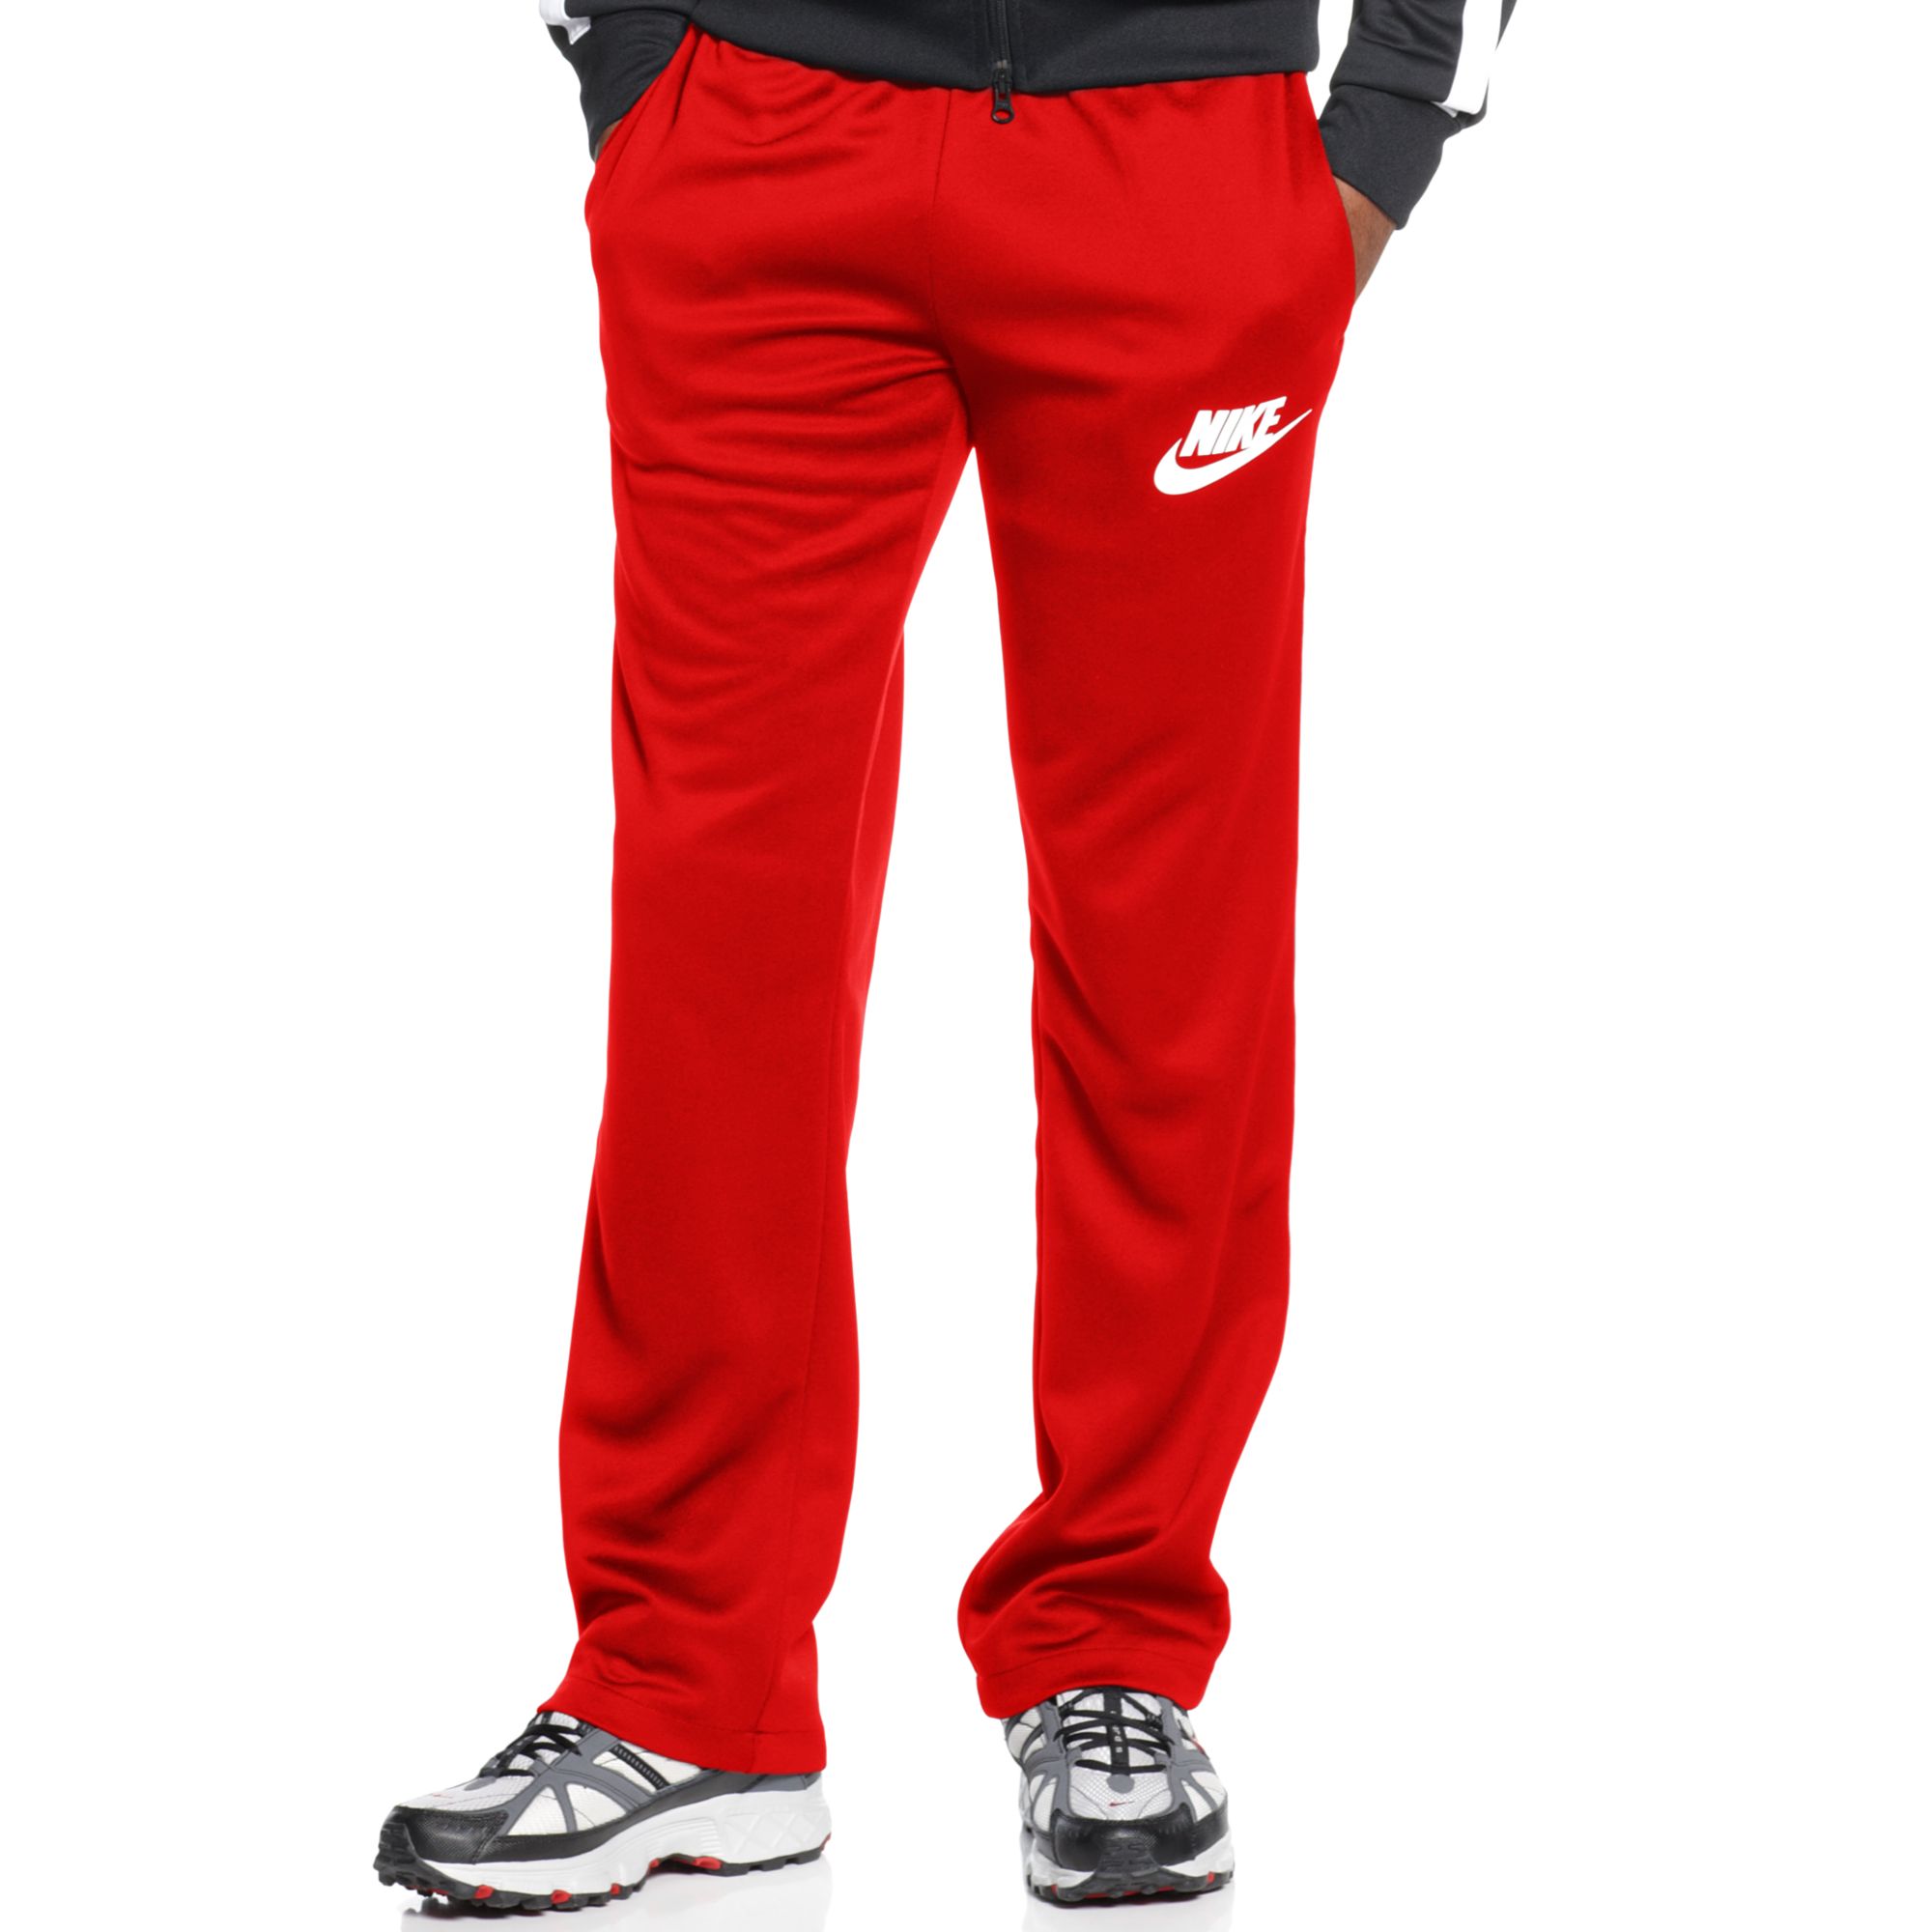 Nike Logo Track Pants in Red for Men - Lyst